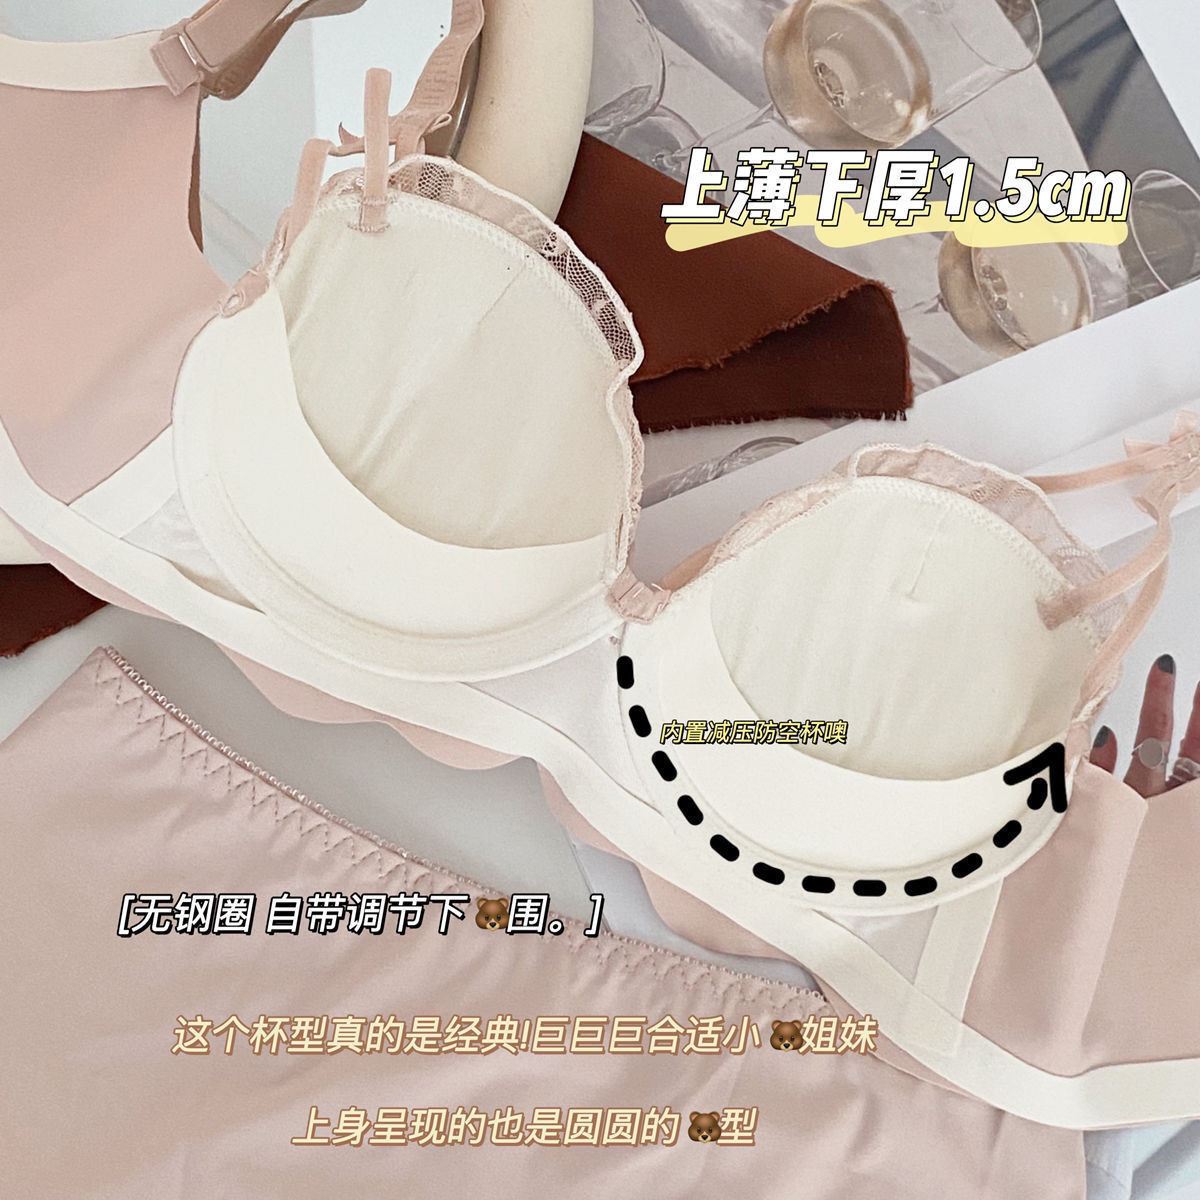 Small chest gathered no steel ring sexy underwear women's anti-sagging pure desire style 2023 new hot style girls' bra